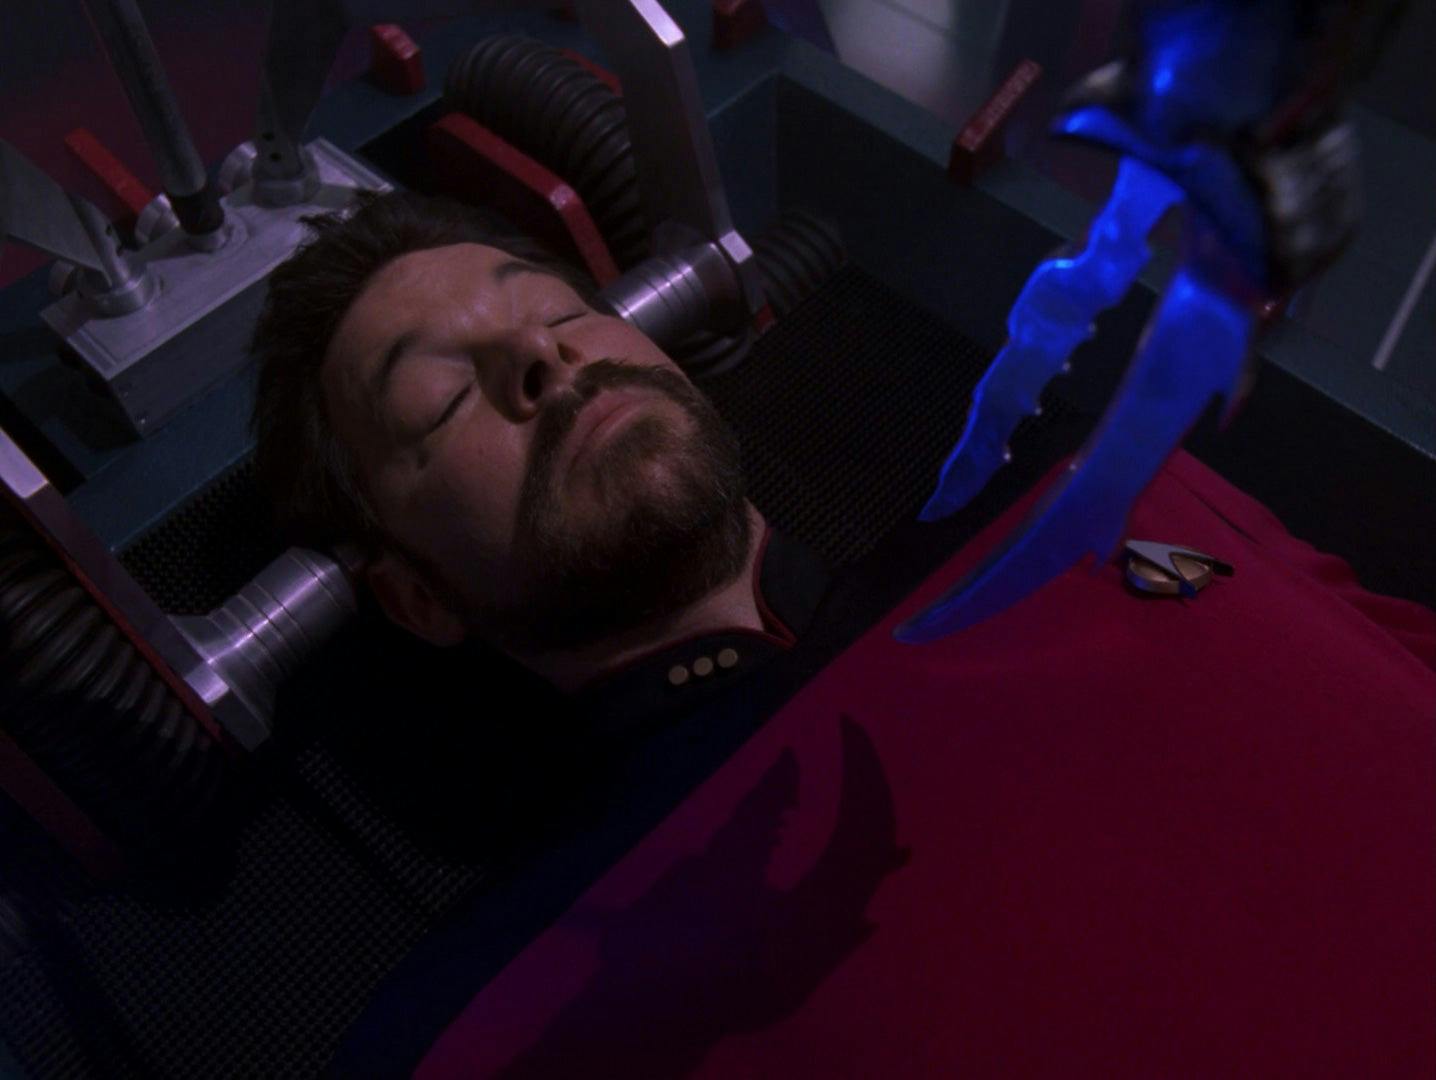 Riker undergoes experiments while he's asleep.